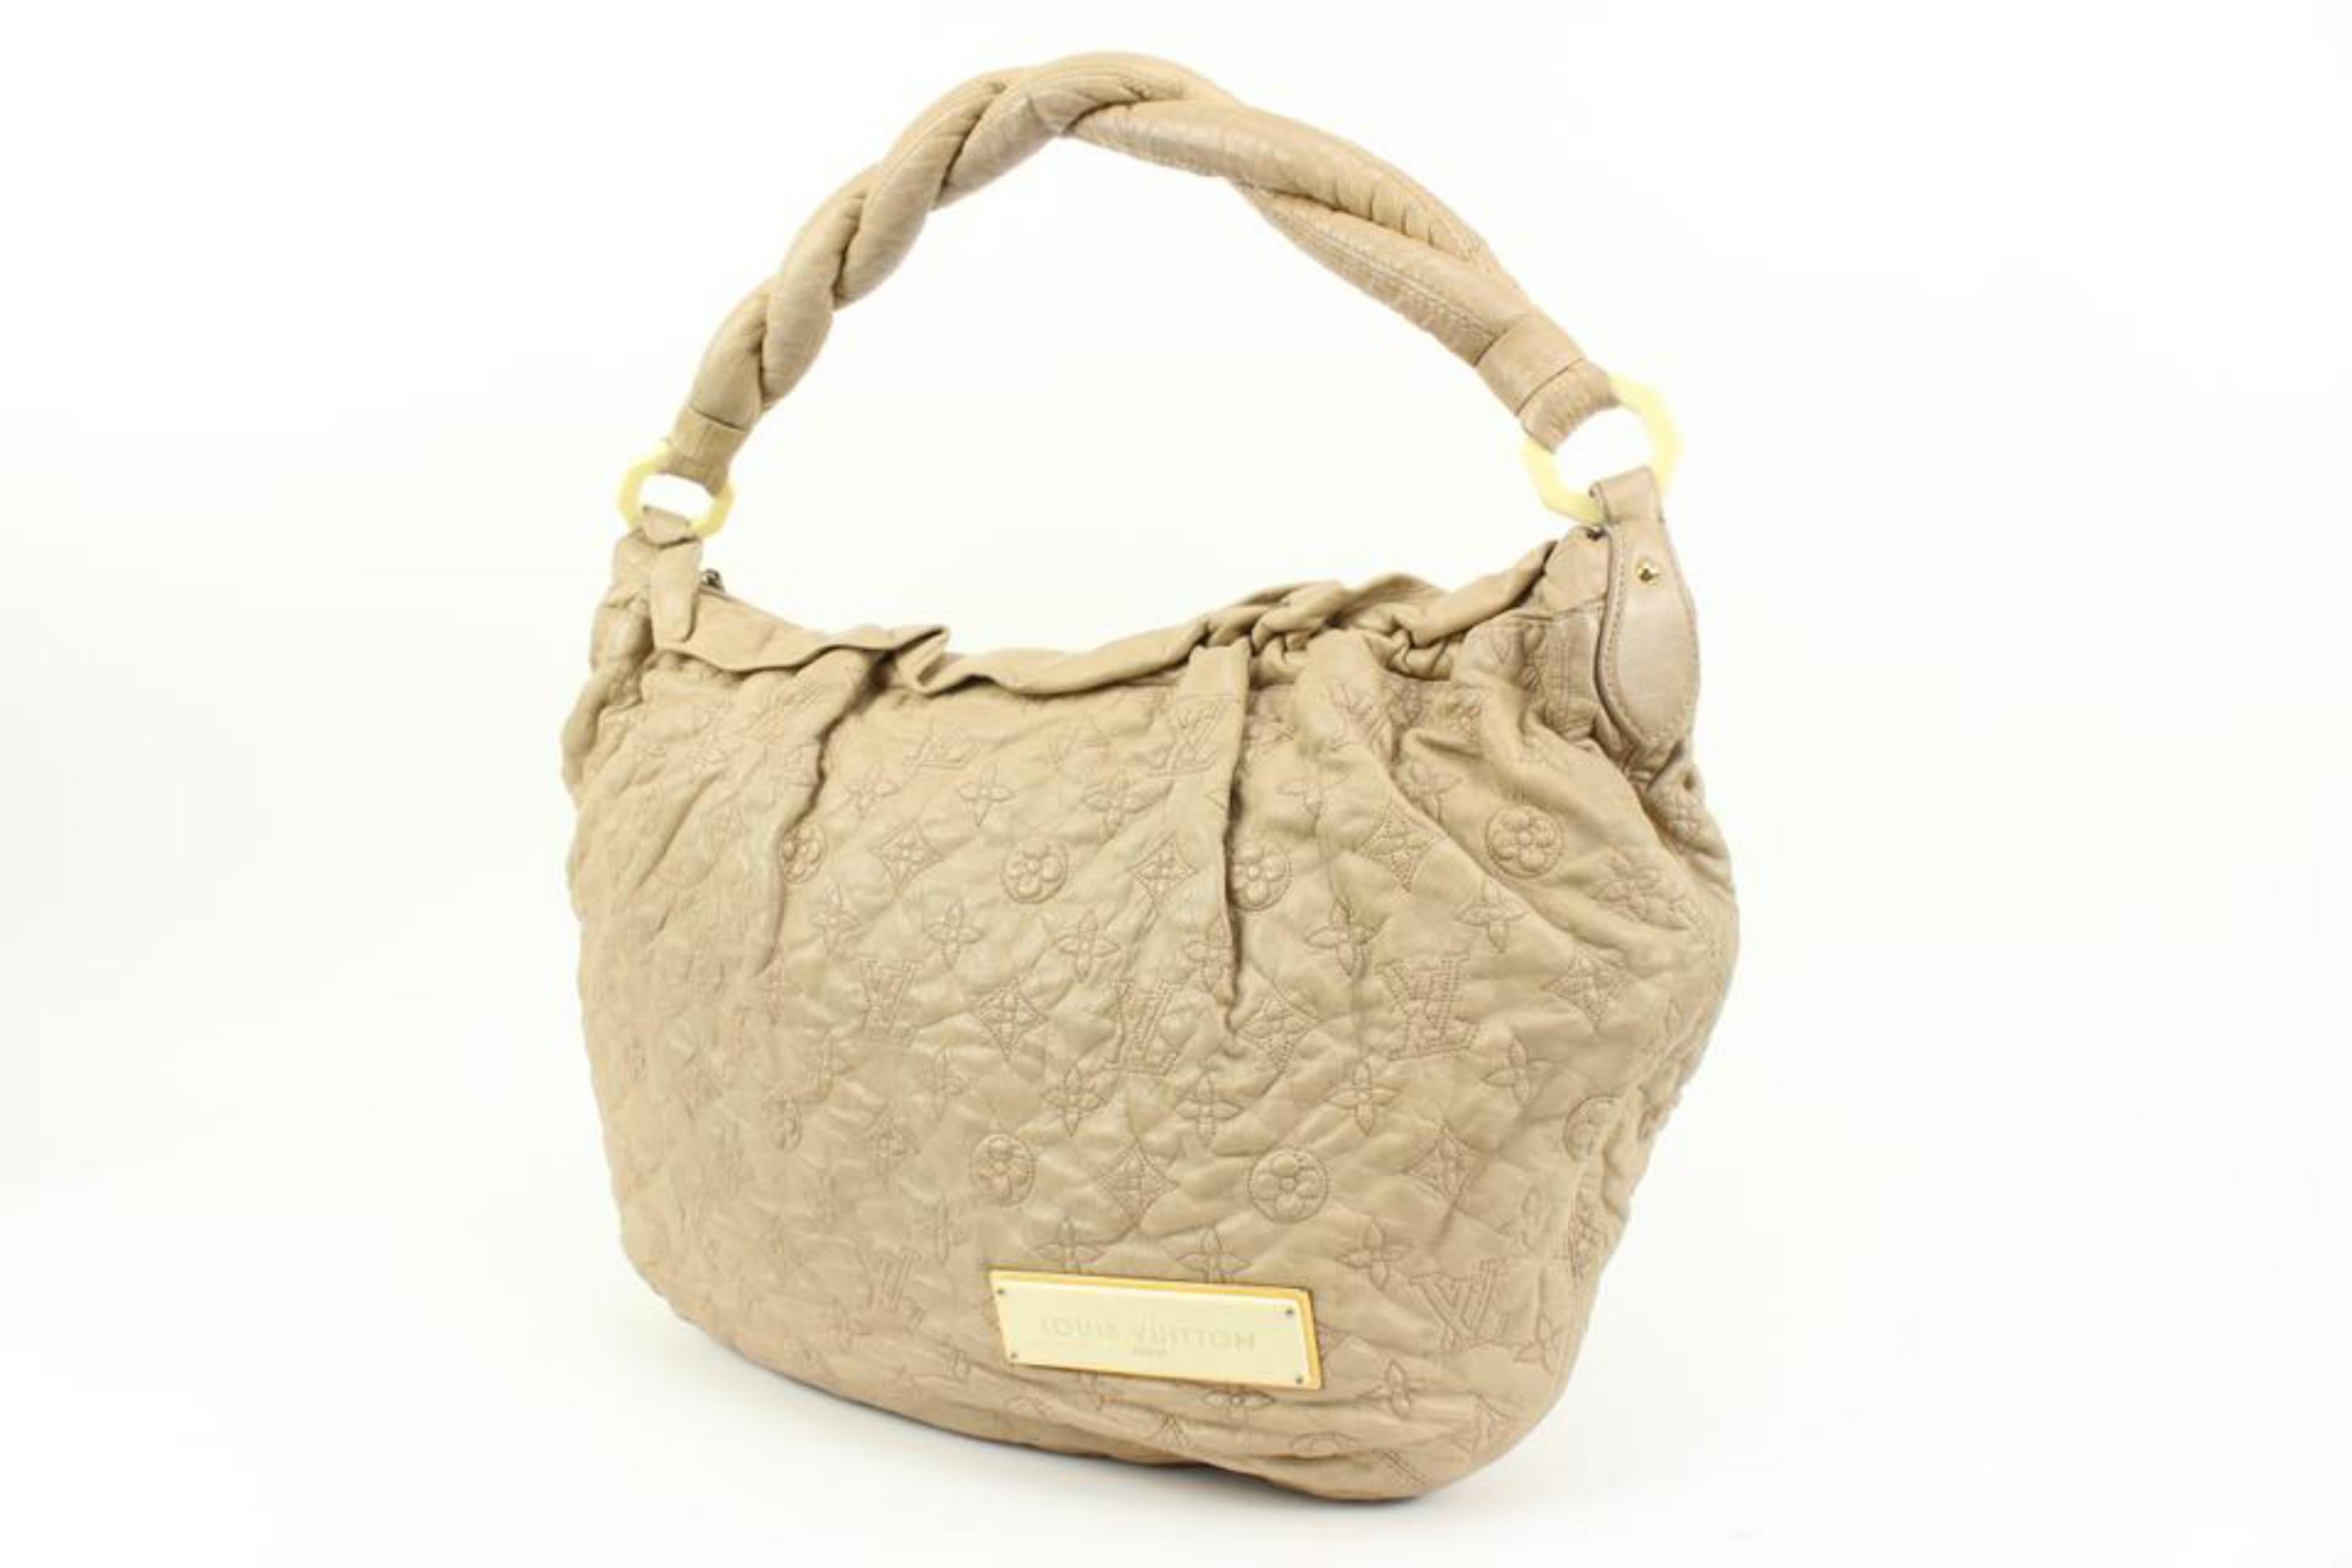 Louis Vuitton Beige Ecru Monogram Leather Olympe Croissant Hobo 28lk324s
Date Code/Serial Number: RC0047
Made In: Italy
Measurements: Length:  19